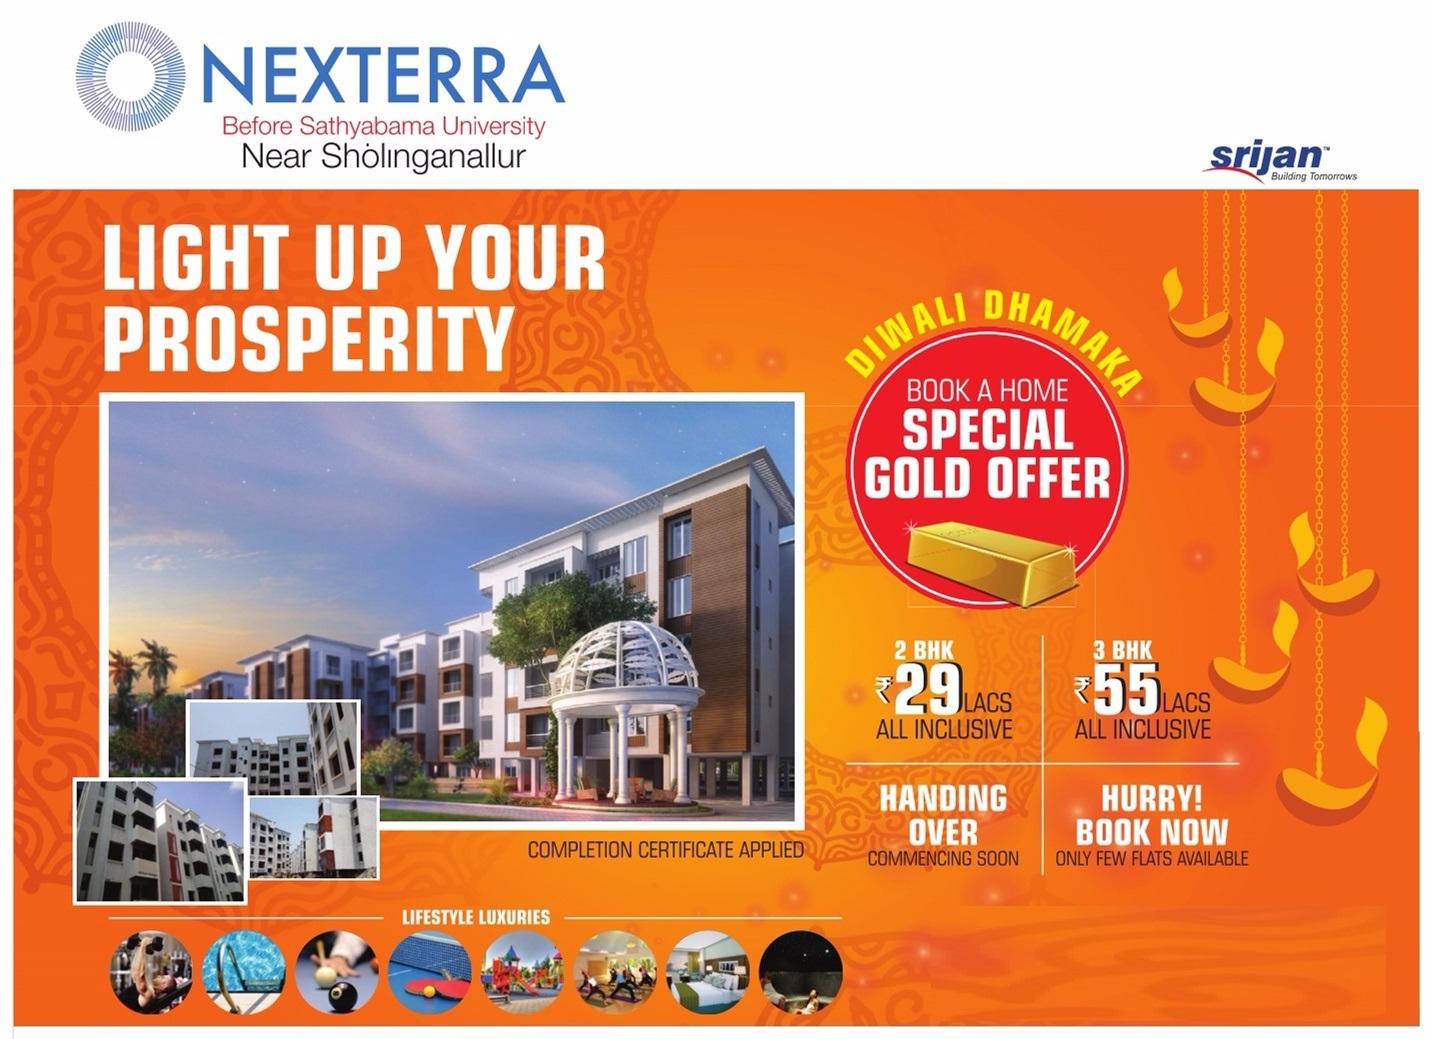 Light up your prosperity with book a home special gold offer at PS Srijan Nexterra in Chennai